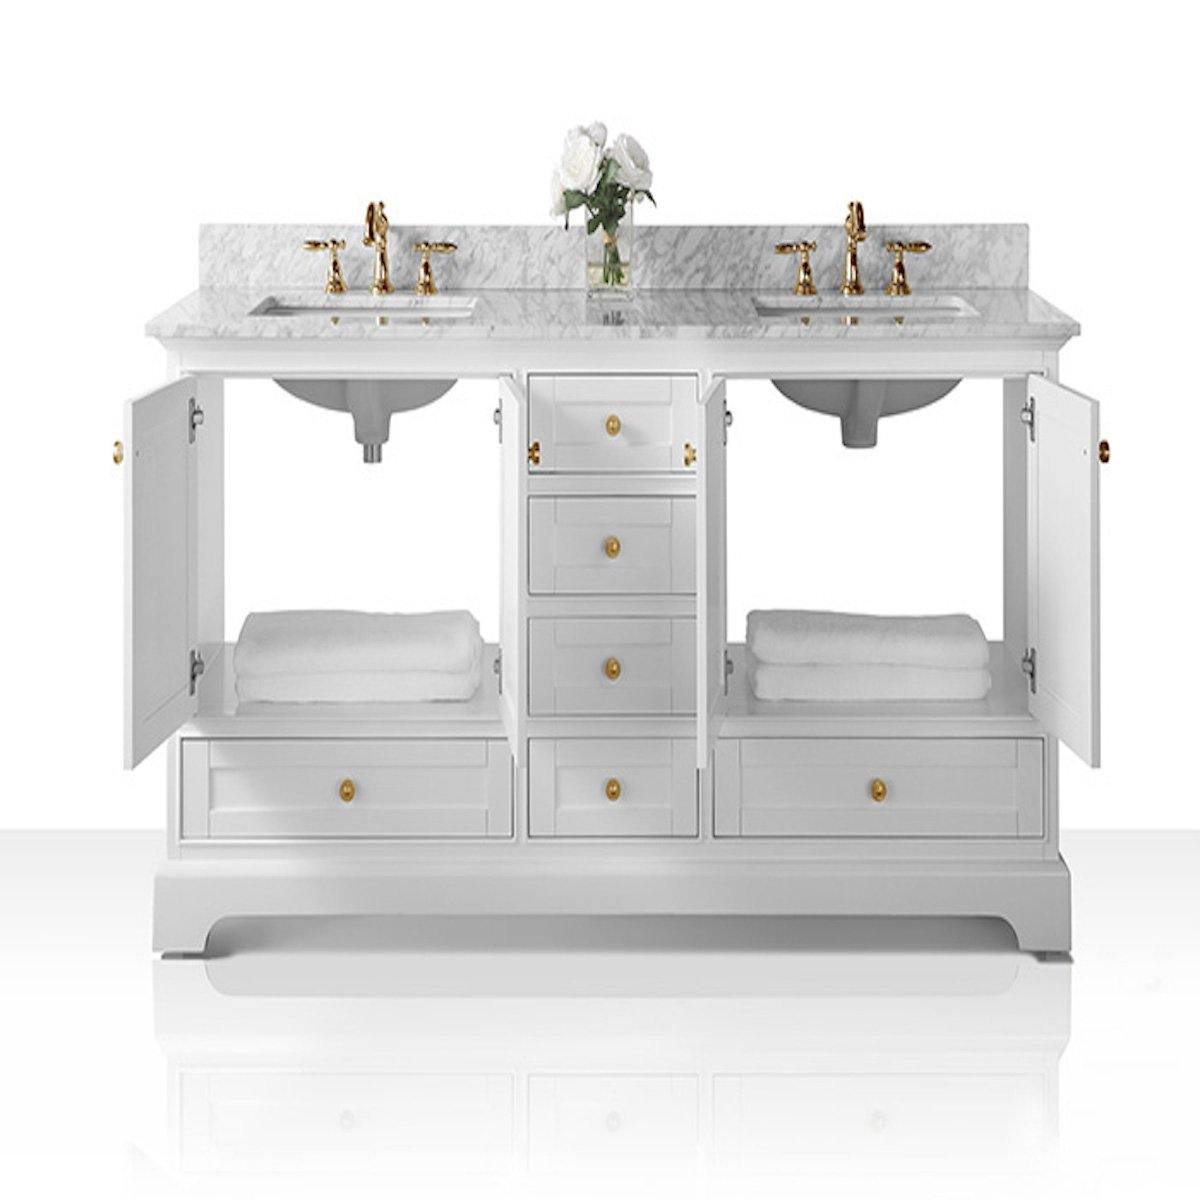 Ancerre Designs Audrey 72 Inch White Double Vanity Open Cabinets